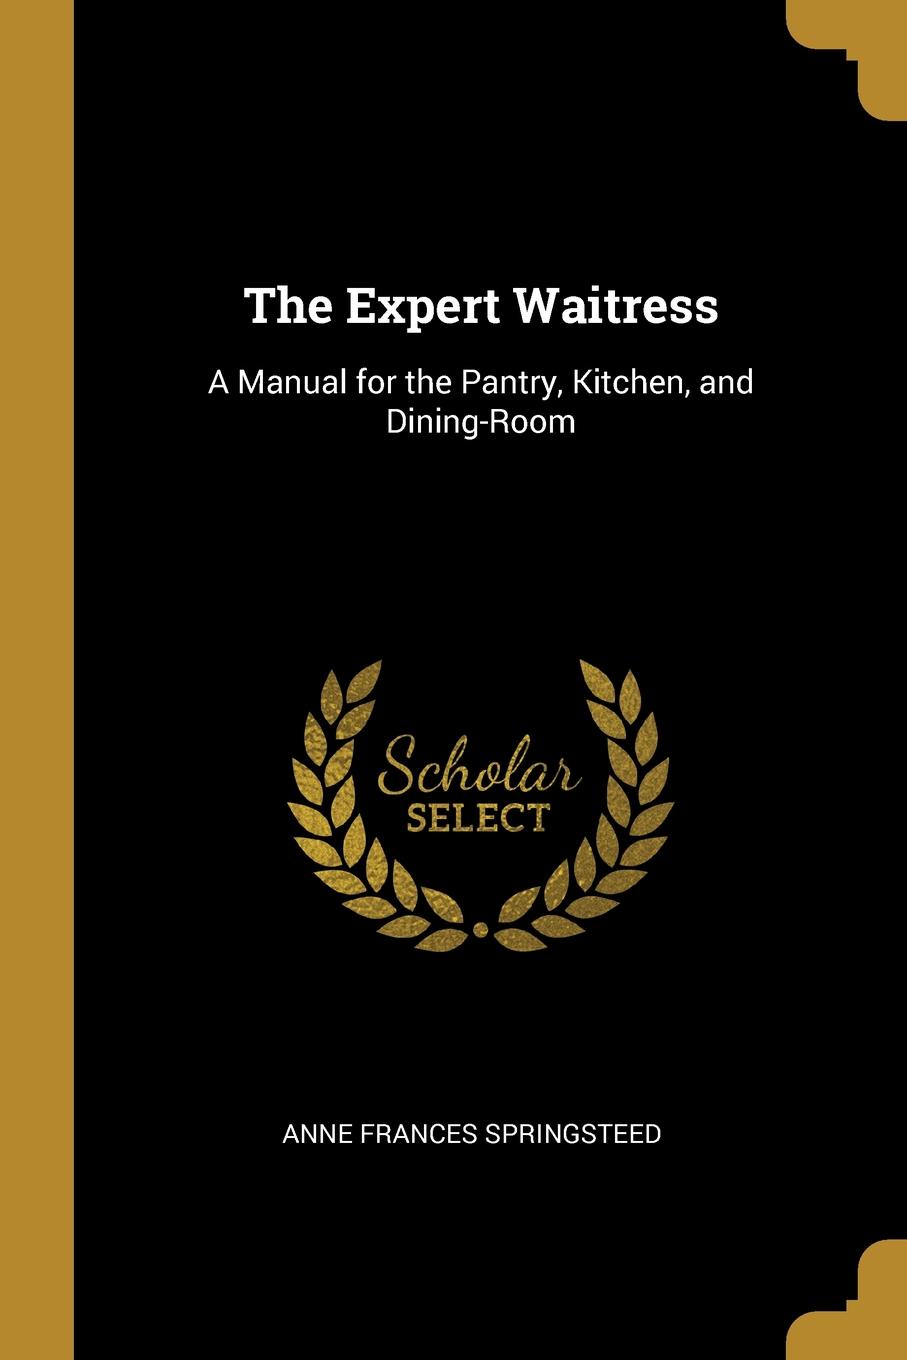 The Expert Waitress. A Manual for the Pantry, Kitchen, and Dining-Room